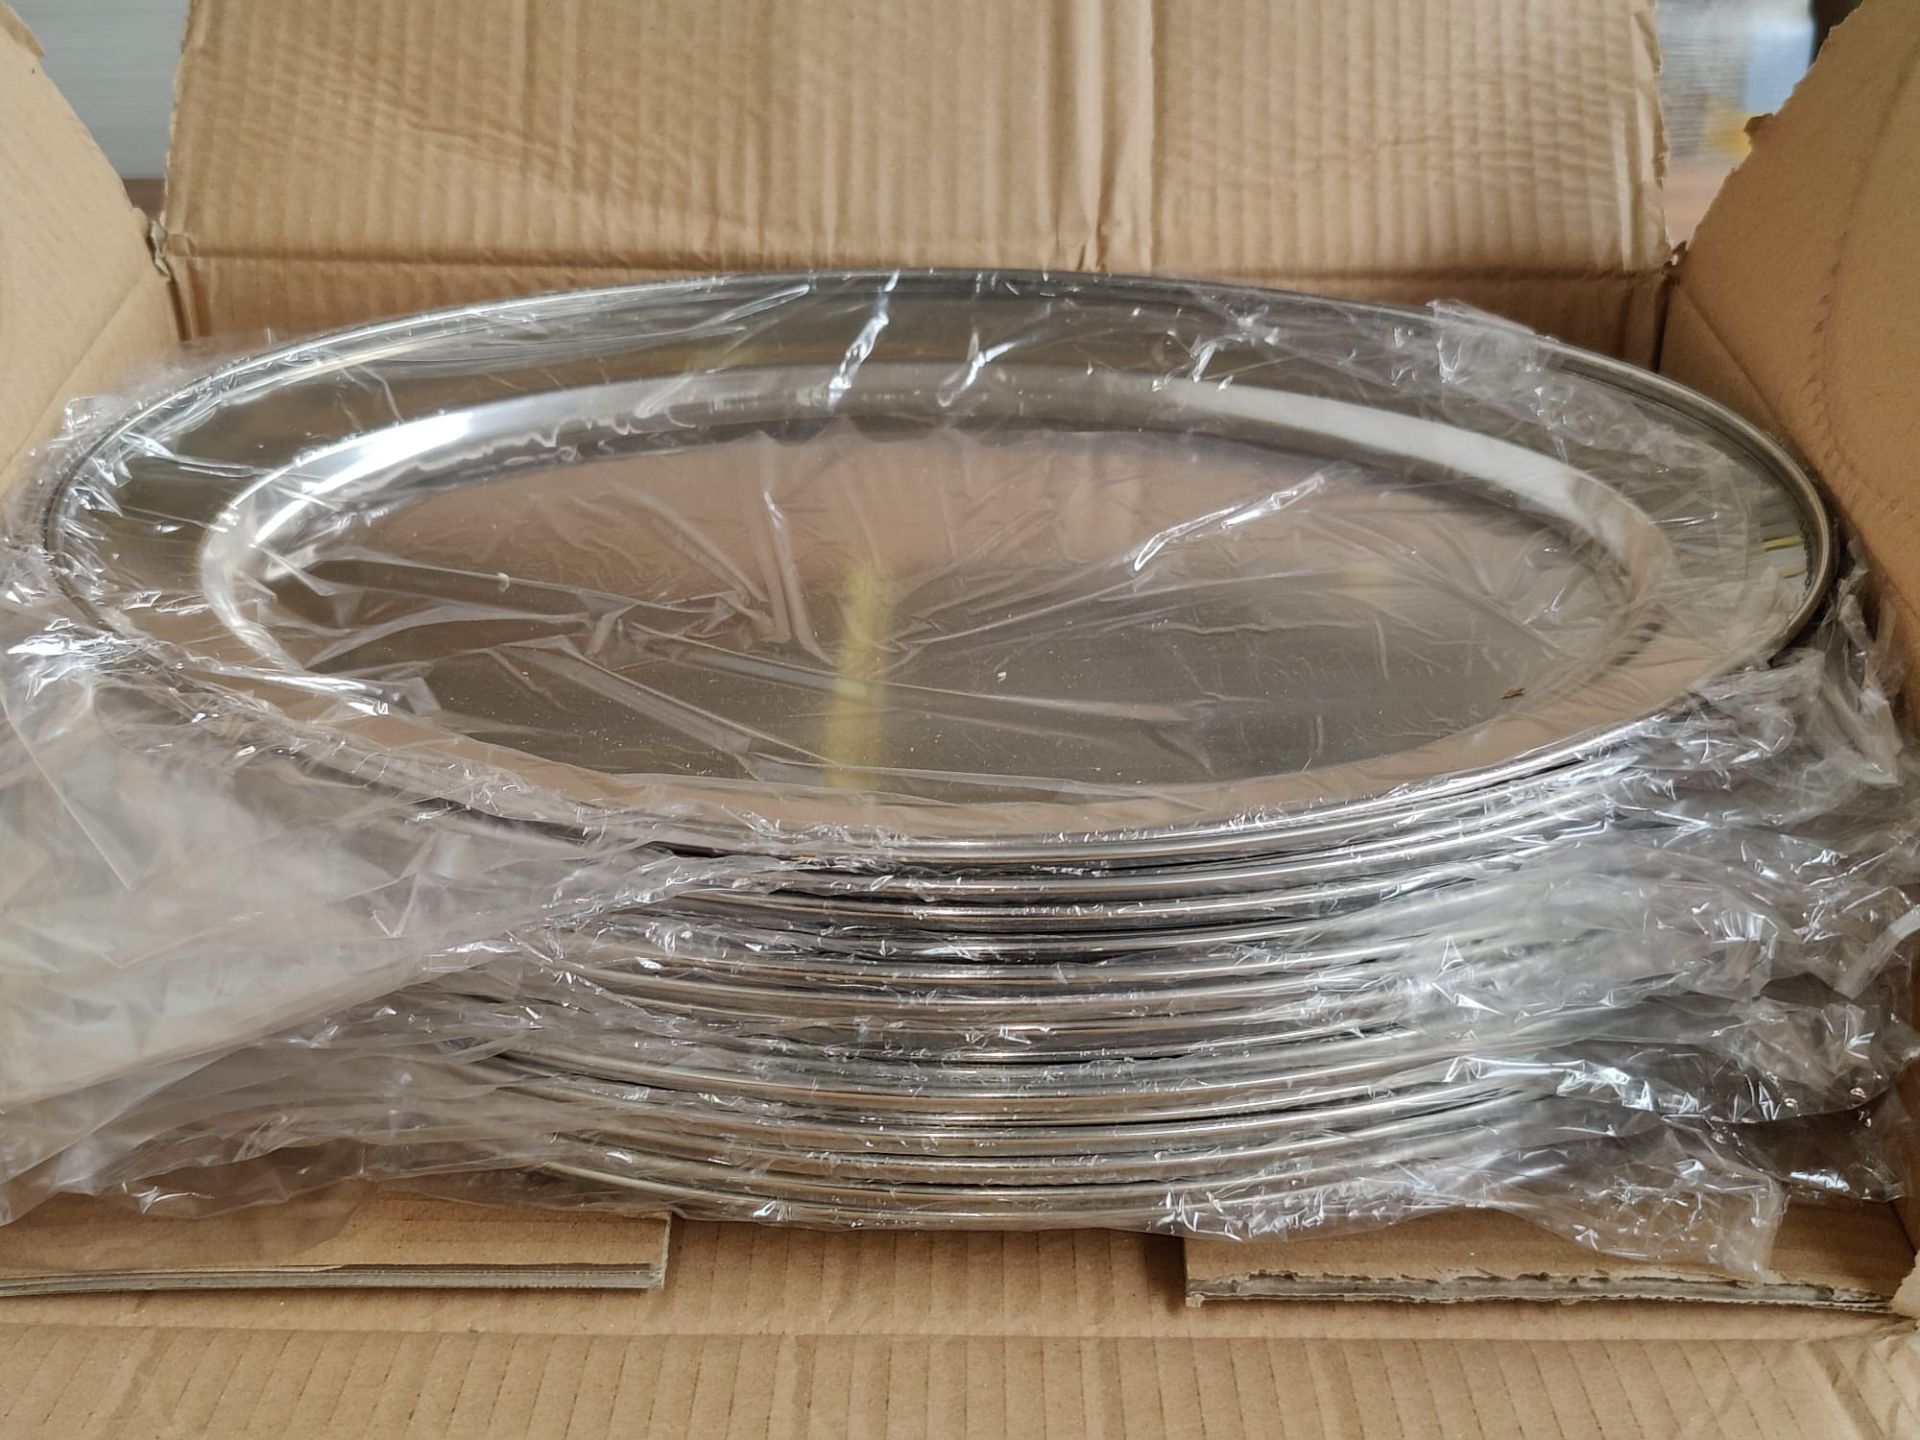 20 x Stainless Steel Oval Service Trays - Size: 450mm x 310mm - Brand New Boxed Stock - RRP £200 - Image 3 of 8